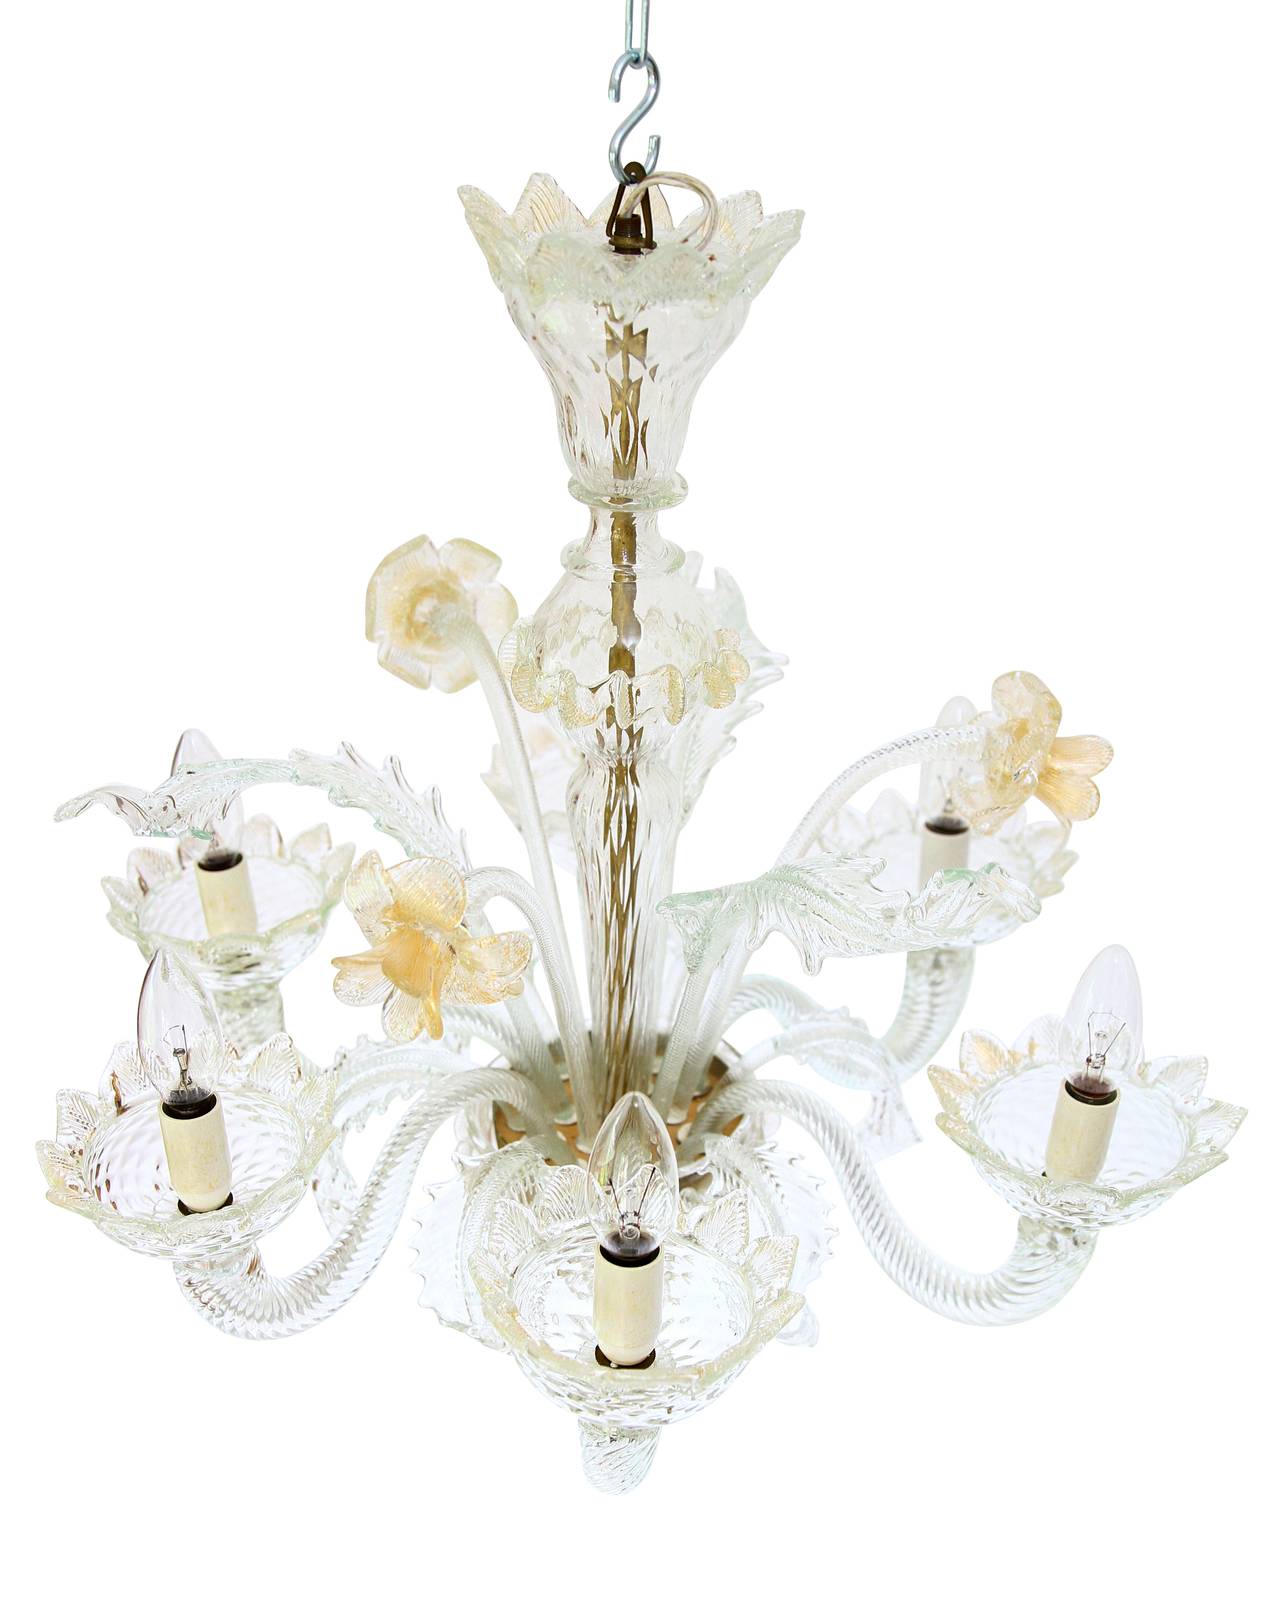 A beautiful floral chandelier made of clear hand blown Murano glass with gold inclusions, Italy. An outstanding Italian lamp from the 1940s.

The light has six arms with sockets for small base bulbs or LEDs.
Professionally cleaned, excellent